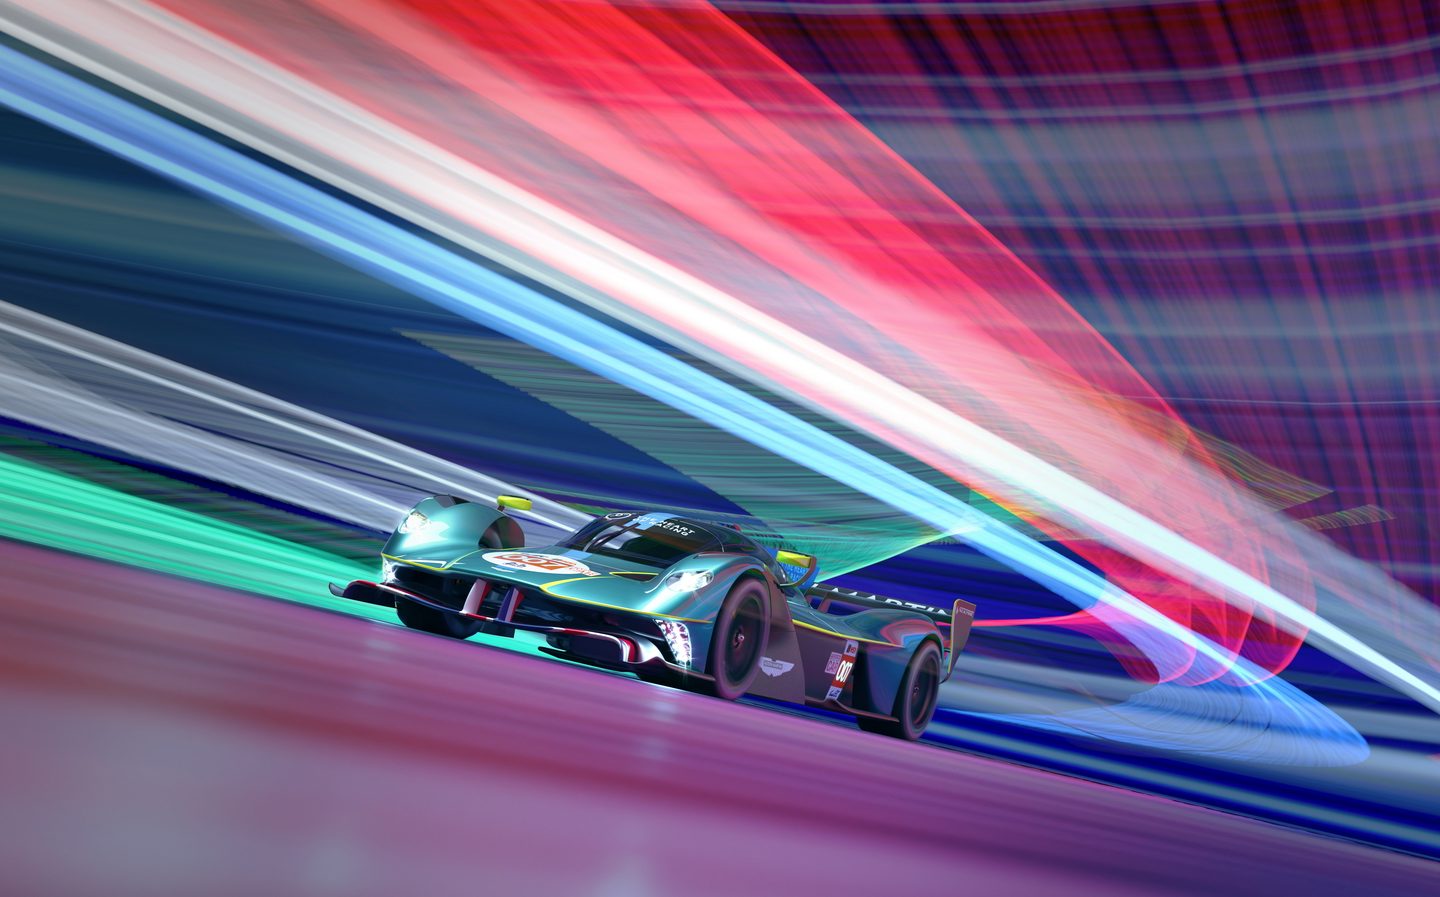 aston martin, le mans, motorsport, valkyrie, aston martin to race for outright le mans victory with valkyrie amr pro hypercar